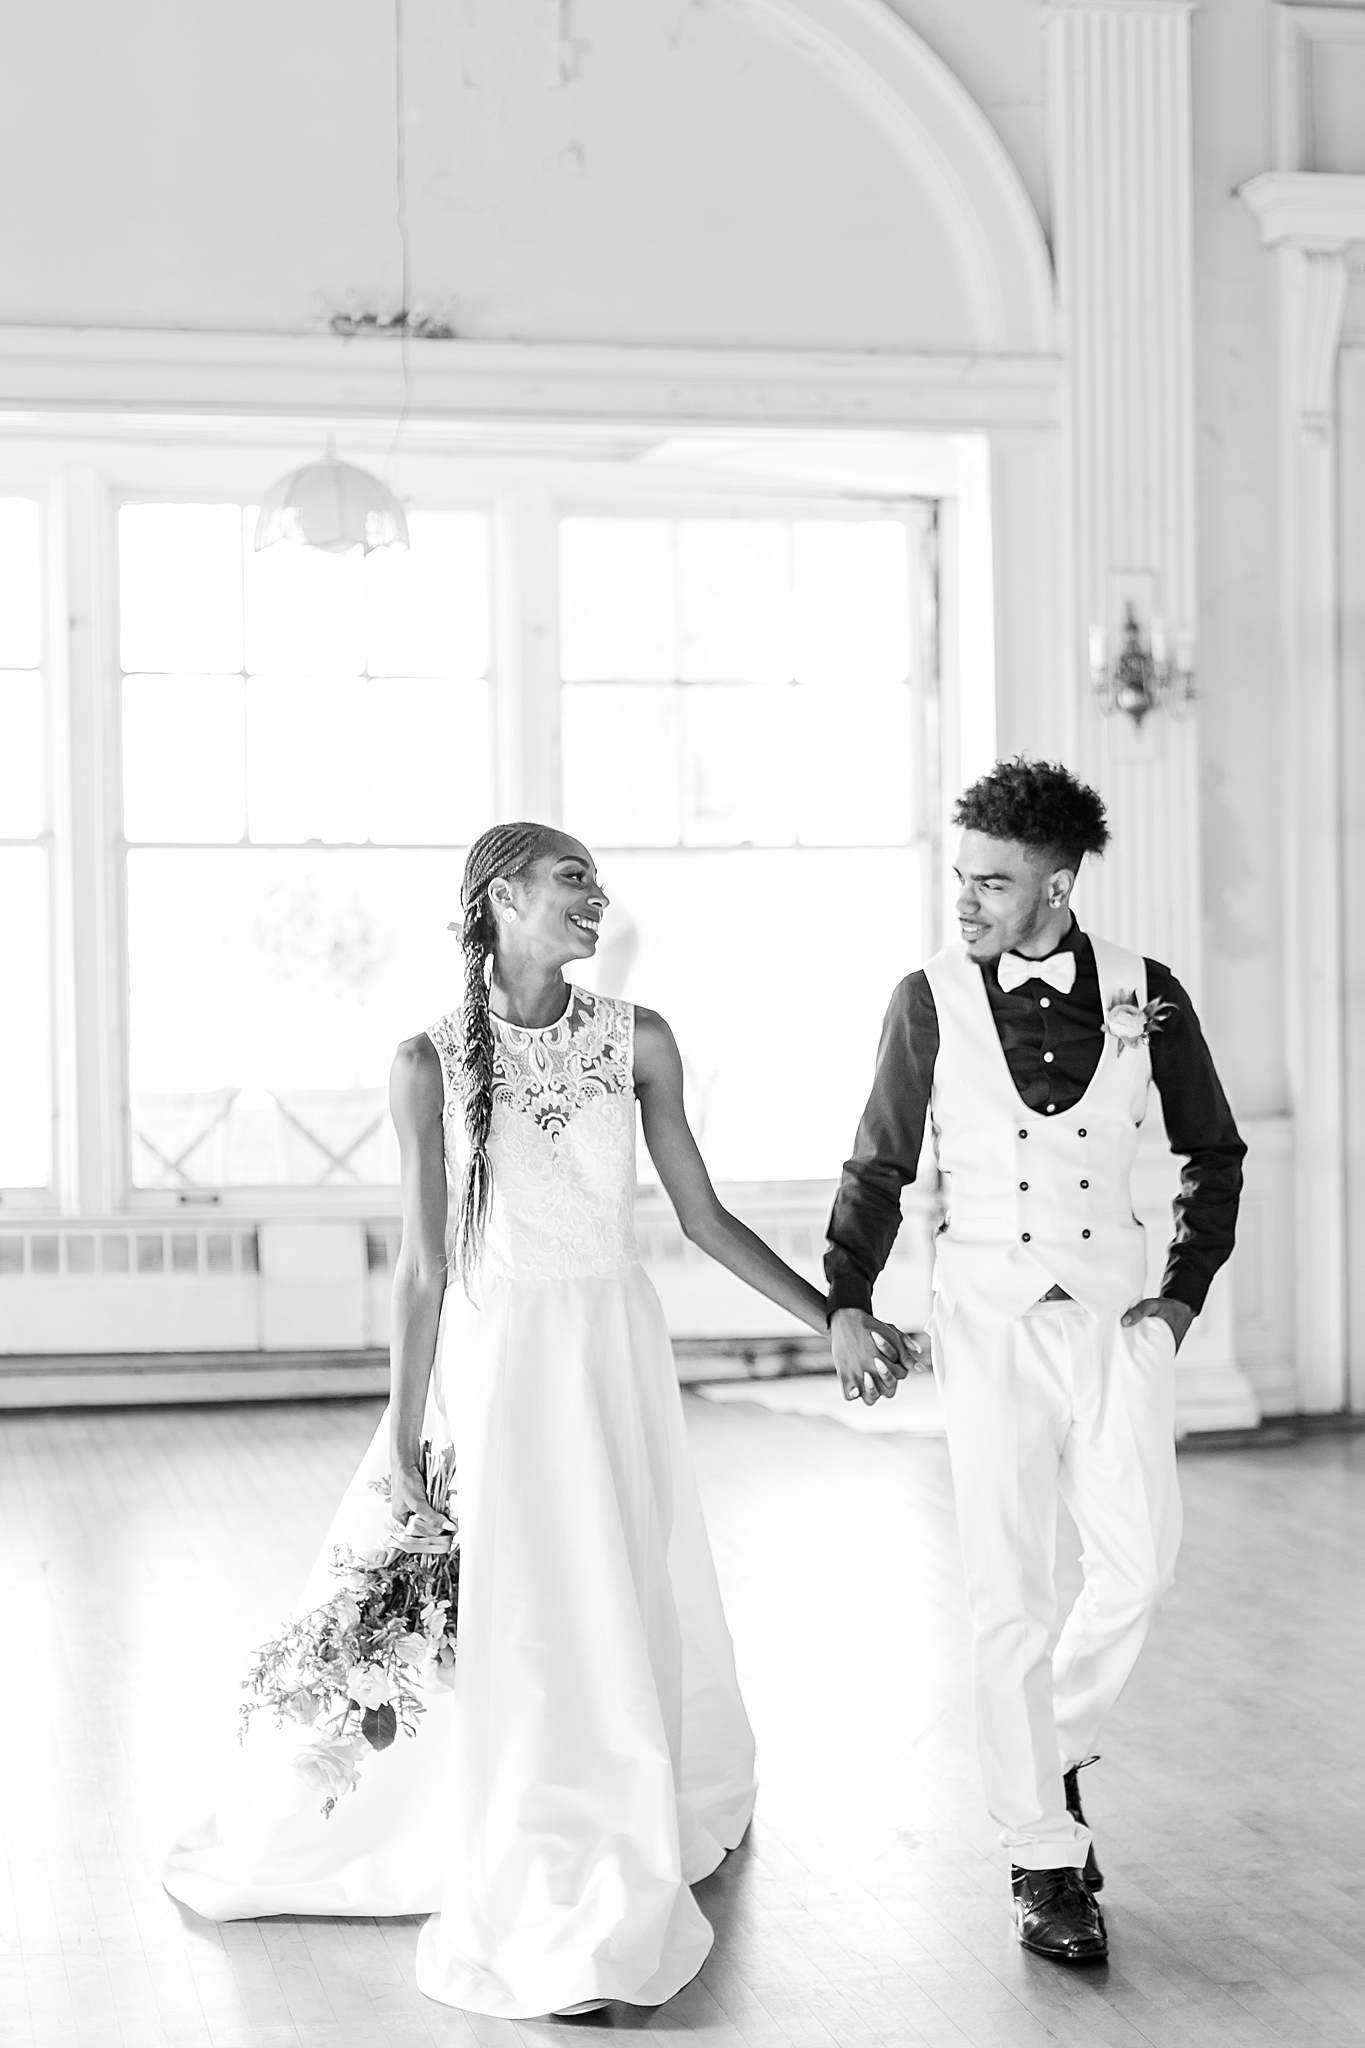 intimate-elopement-wedding-photography-at-belle-isle-boat-house-detroit-mi-by-courtney-carolyn-photography_0011.jpg